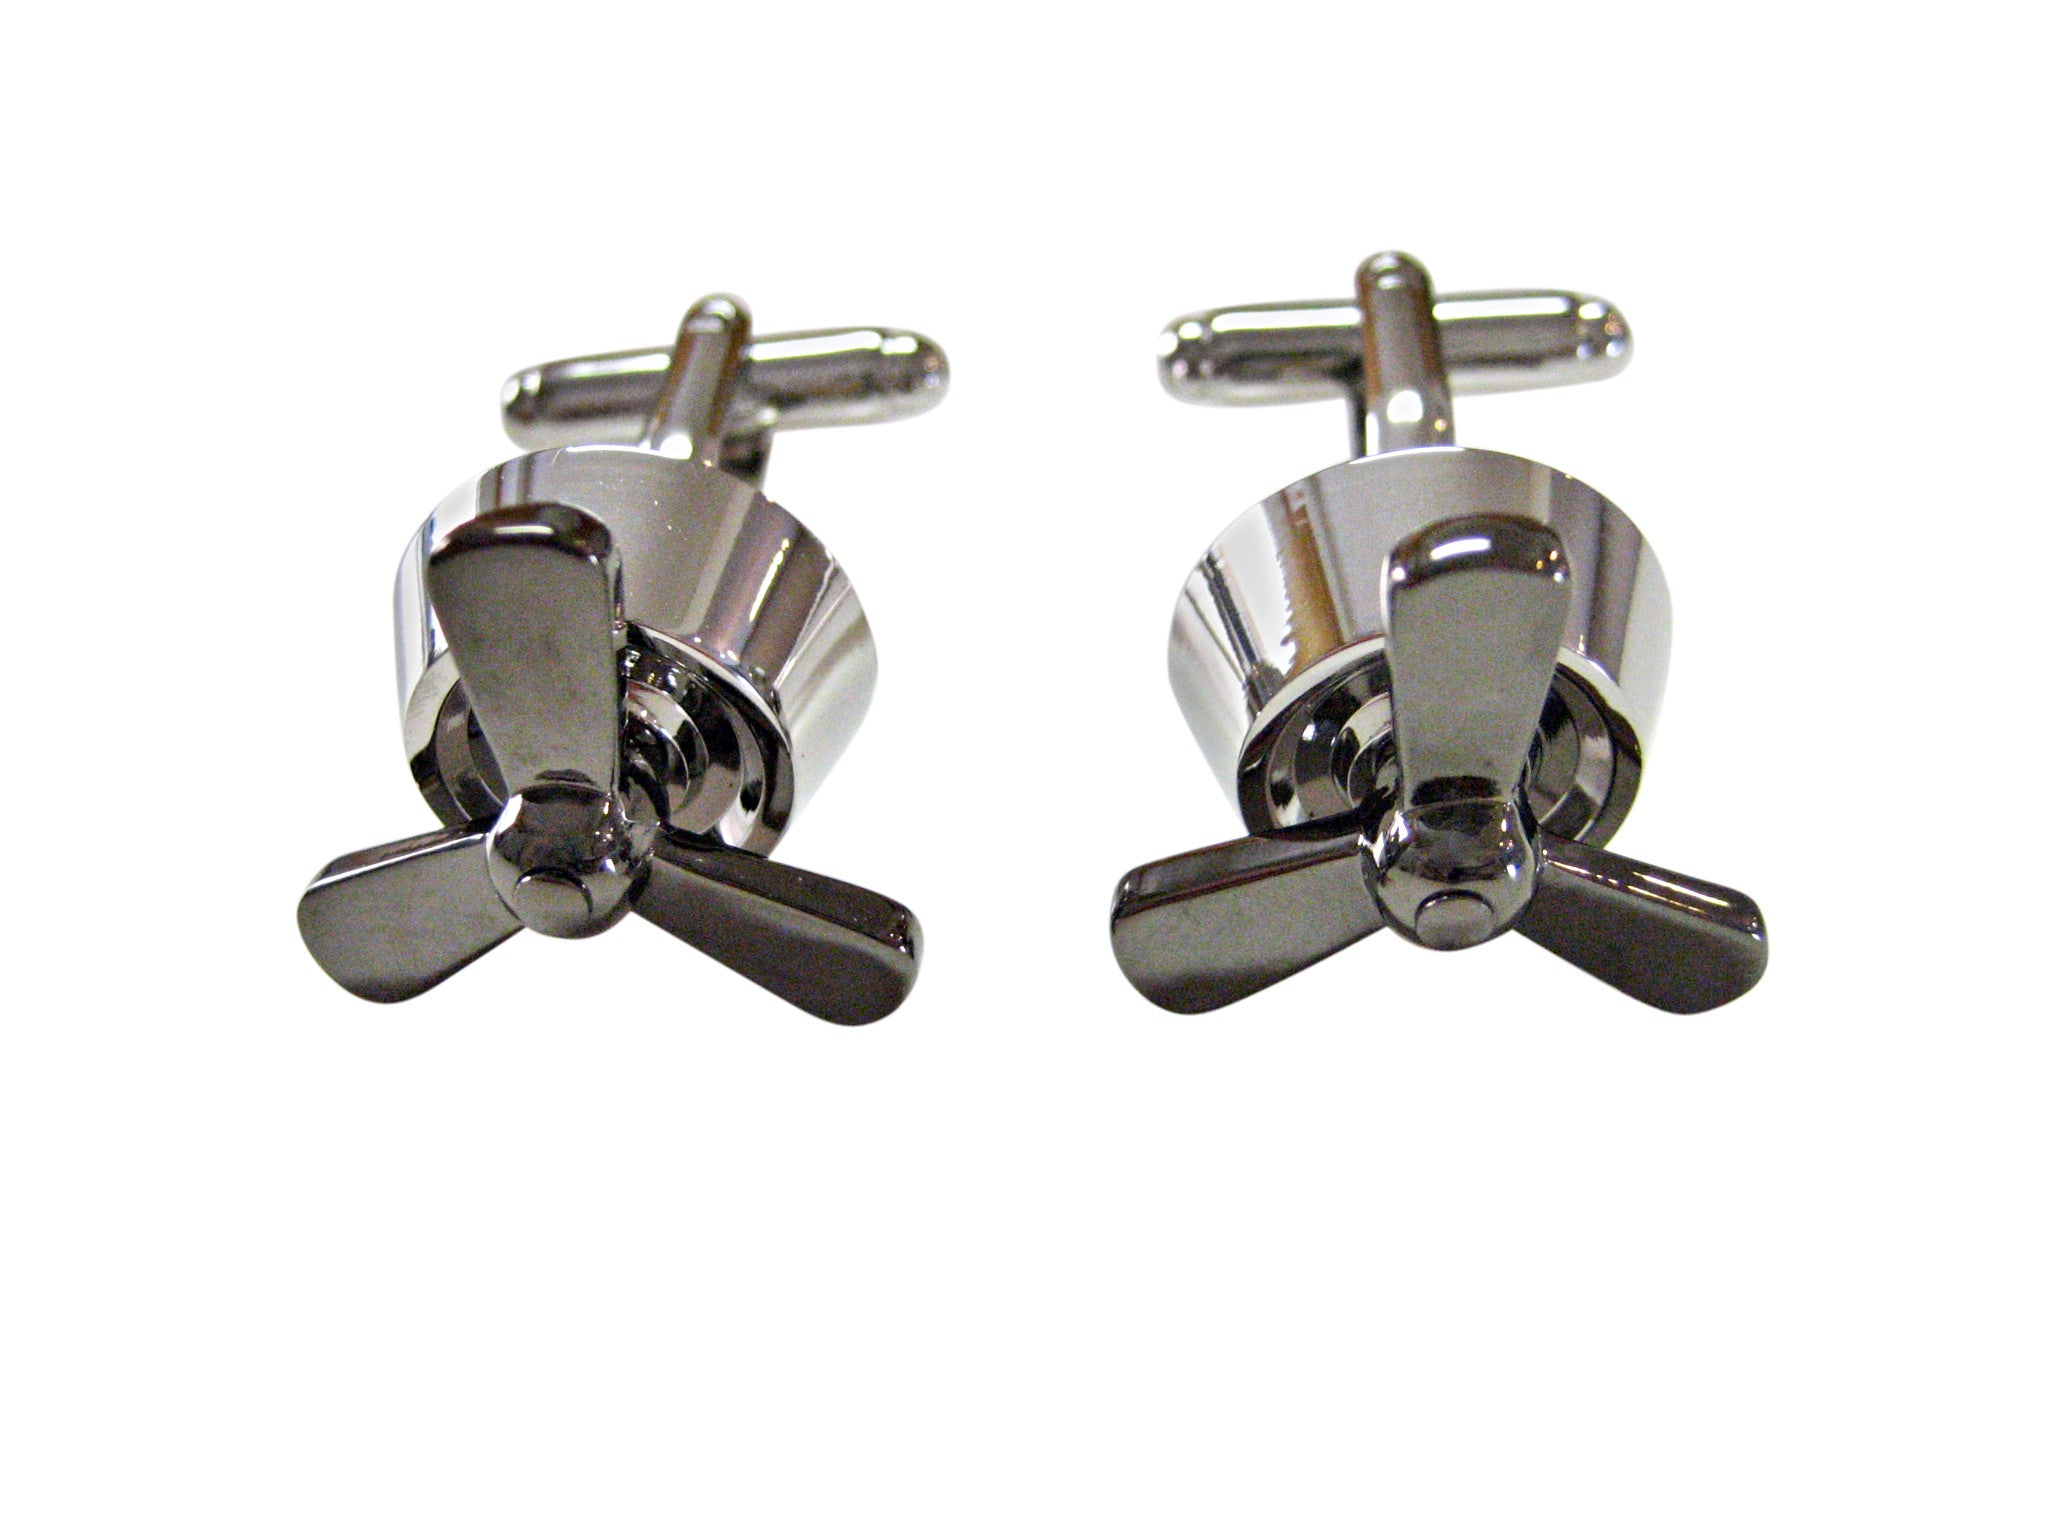 Gunmetal and Silver Toned Propellor Cufflinks